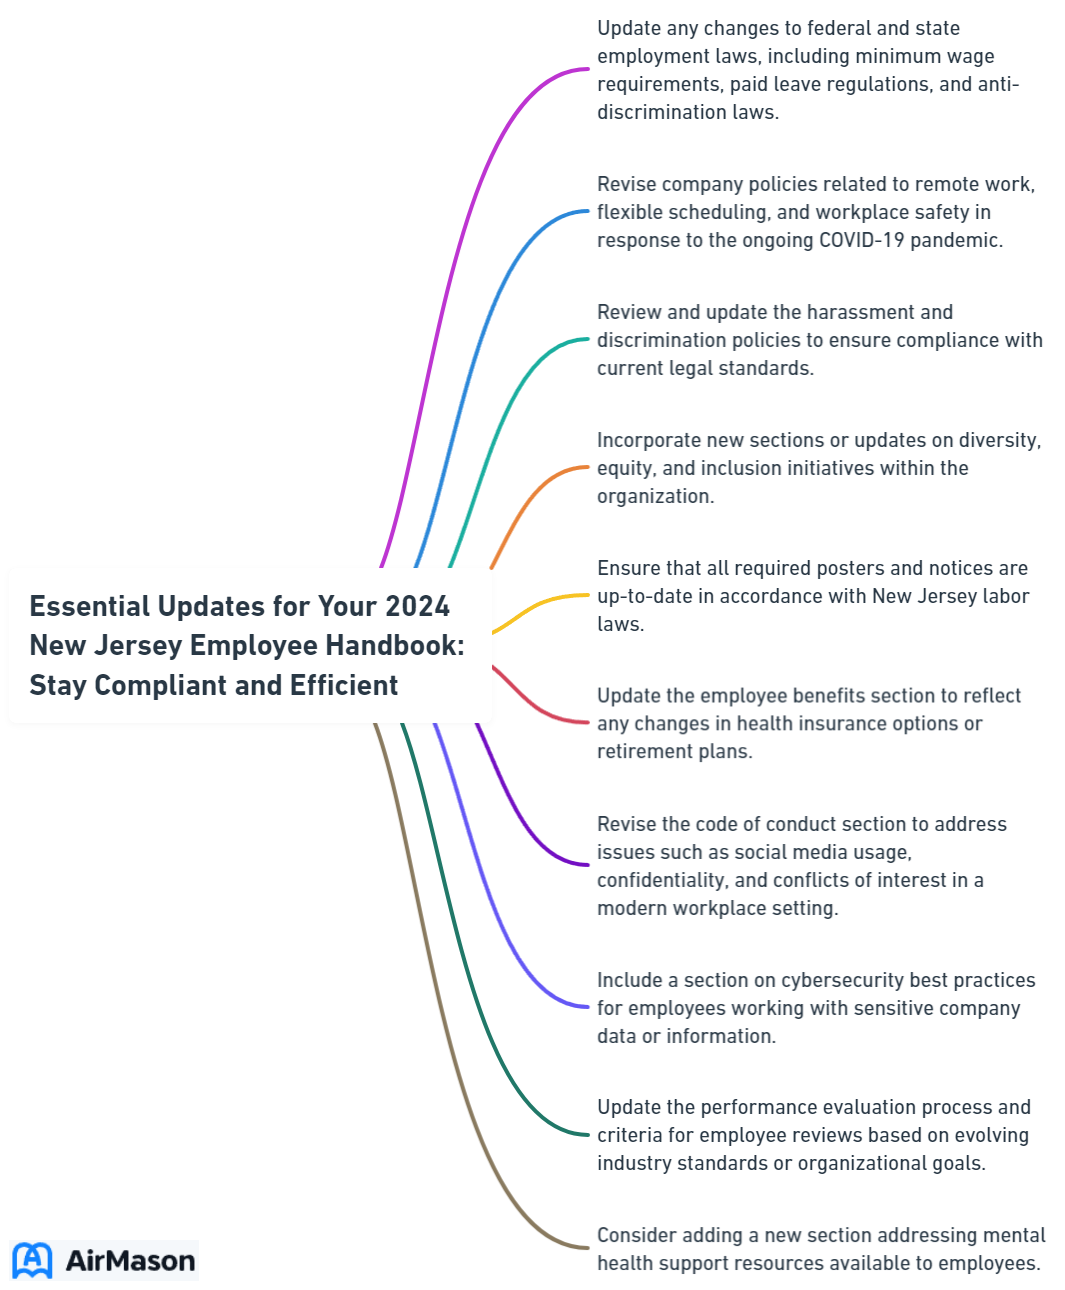 Essential Updates for Your 2024 New Jersey Employee Handbook Stay